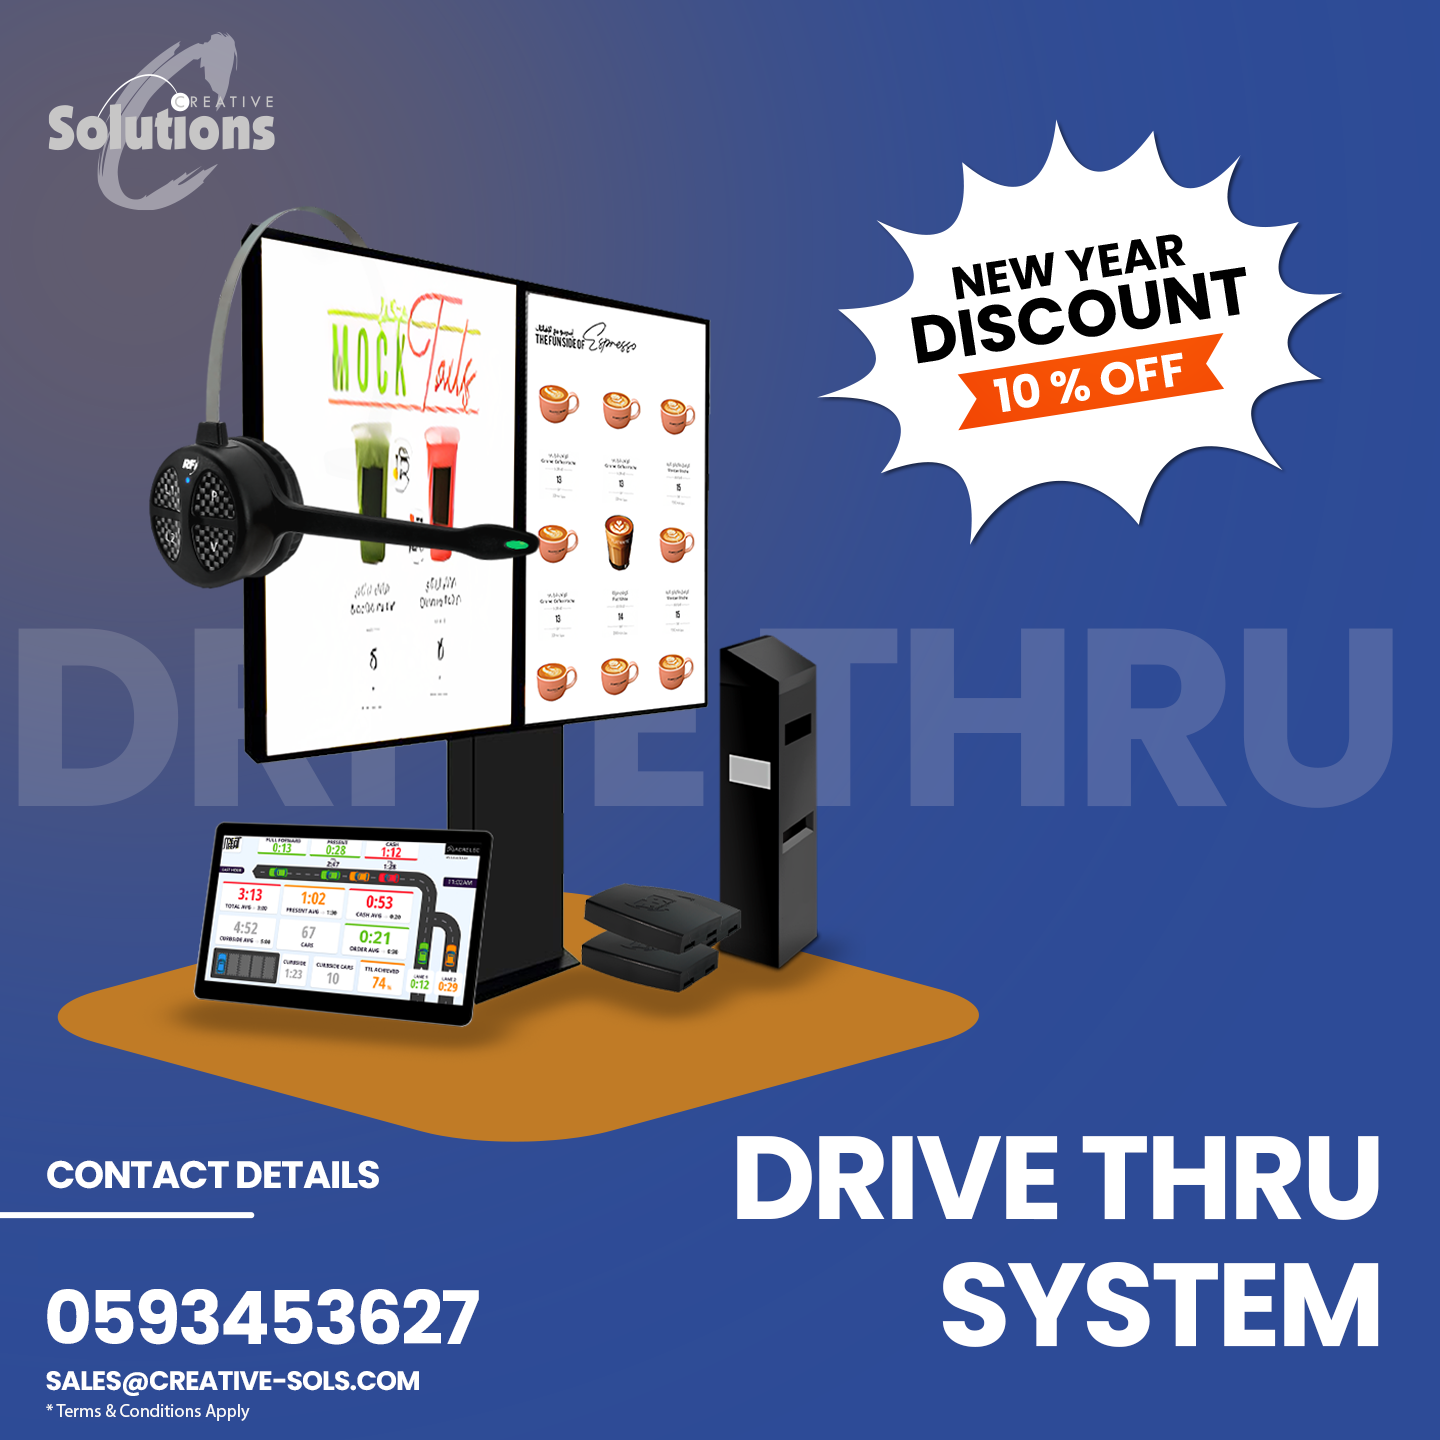 Drive thru System Promotions 03